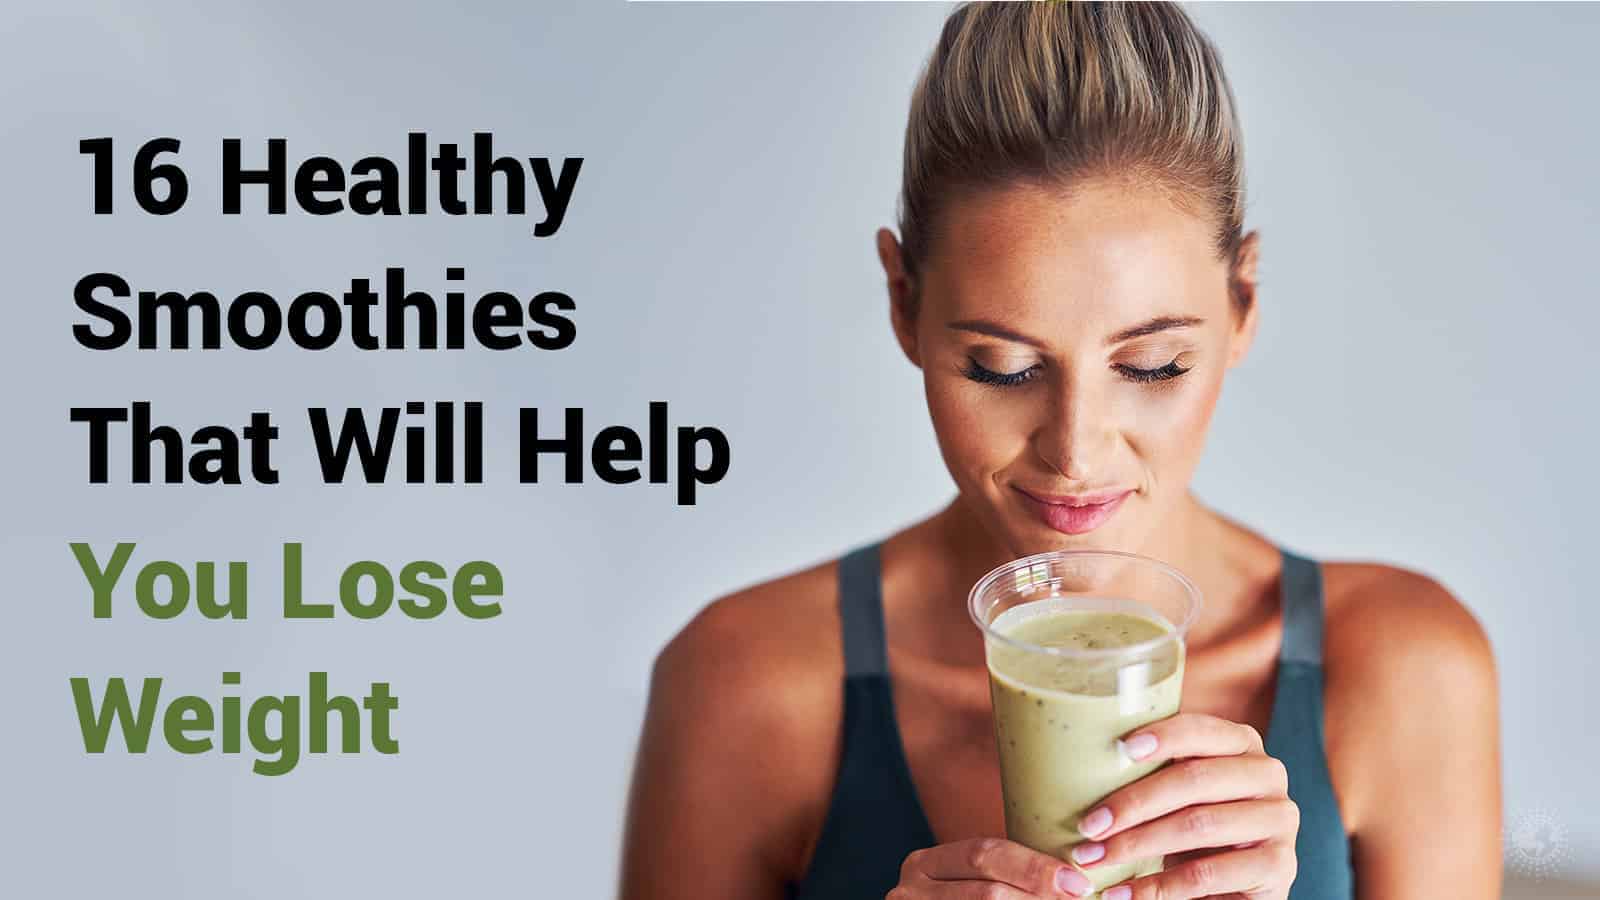 16 Healthy Smoothies That Will Help You Lose Weight